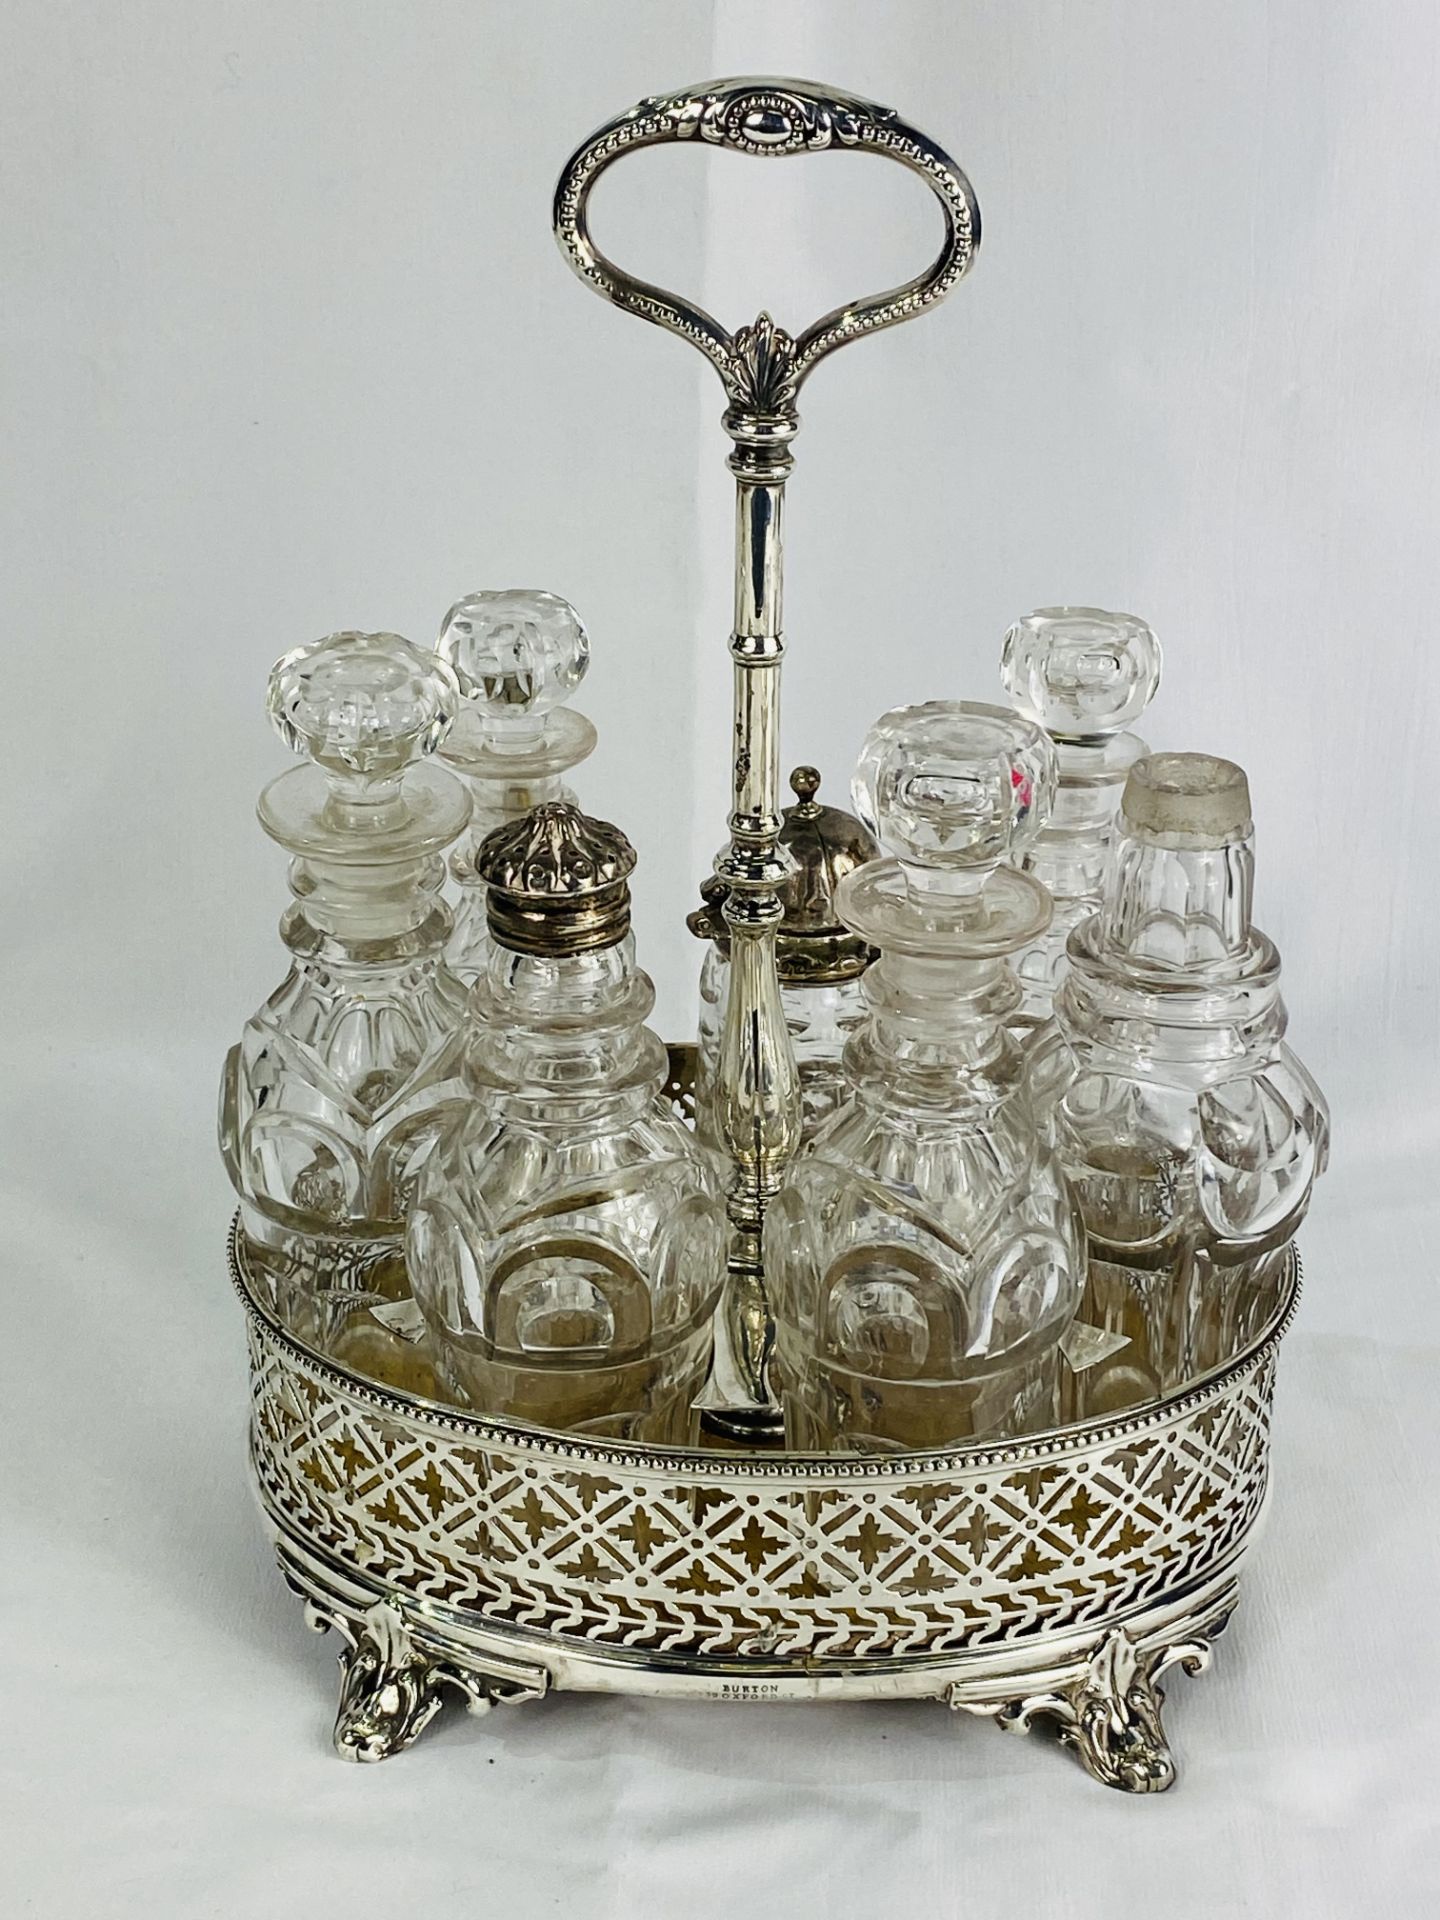 Silver condiment set - Image 2 of 4